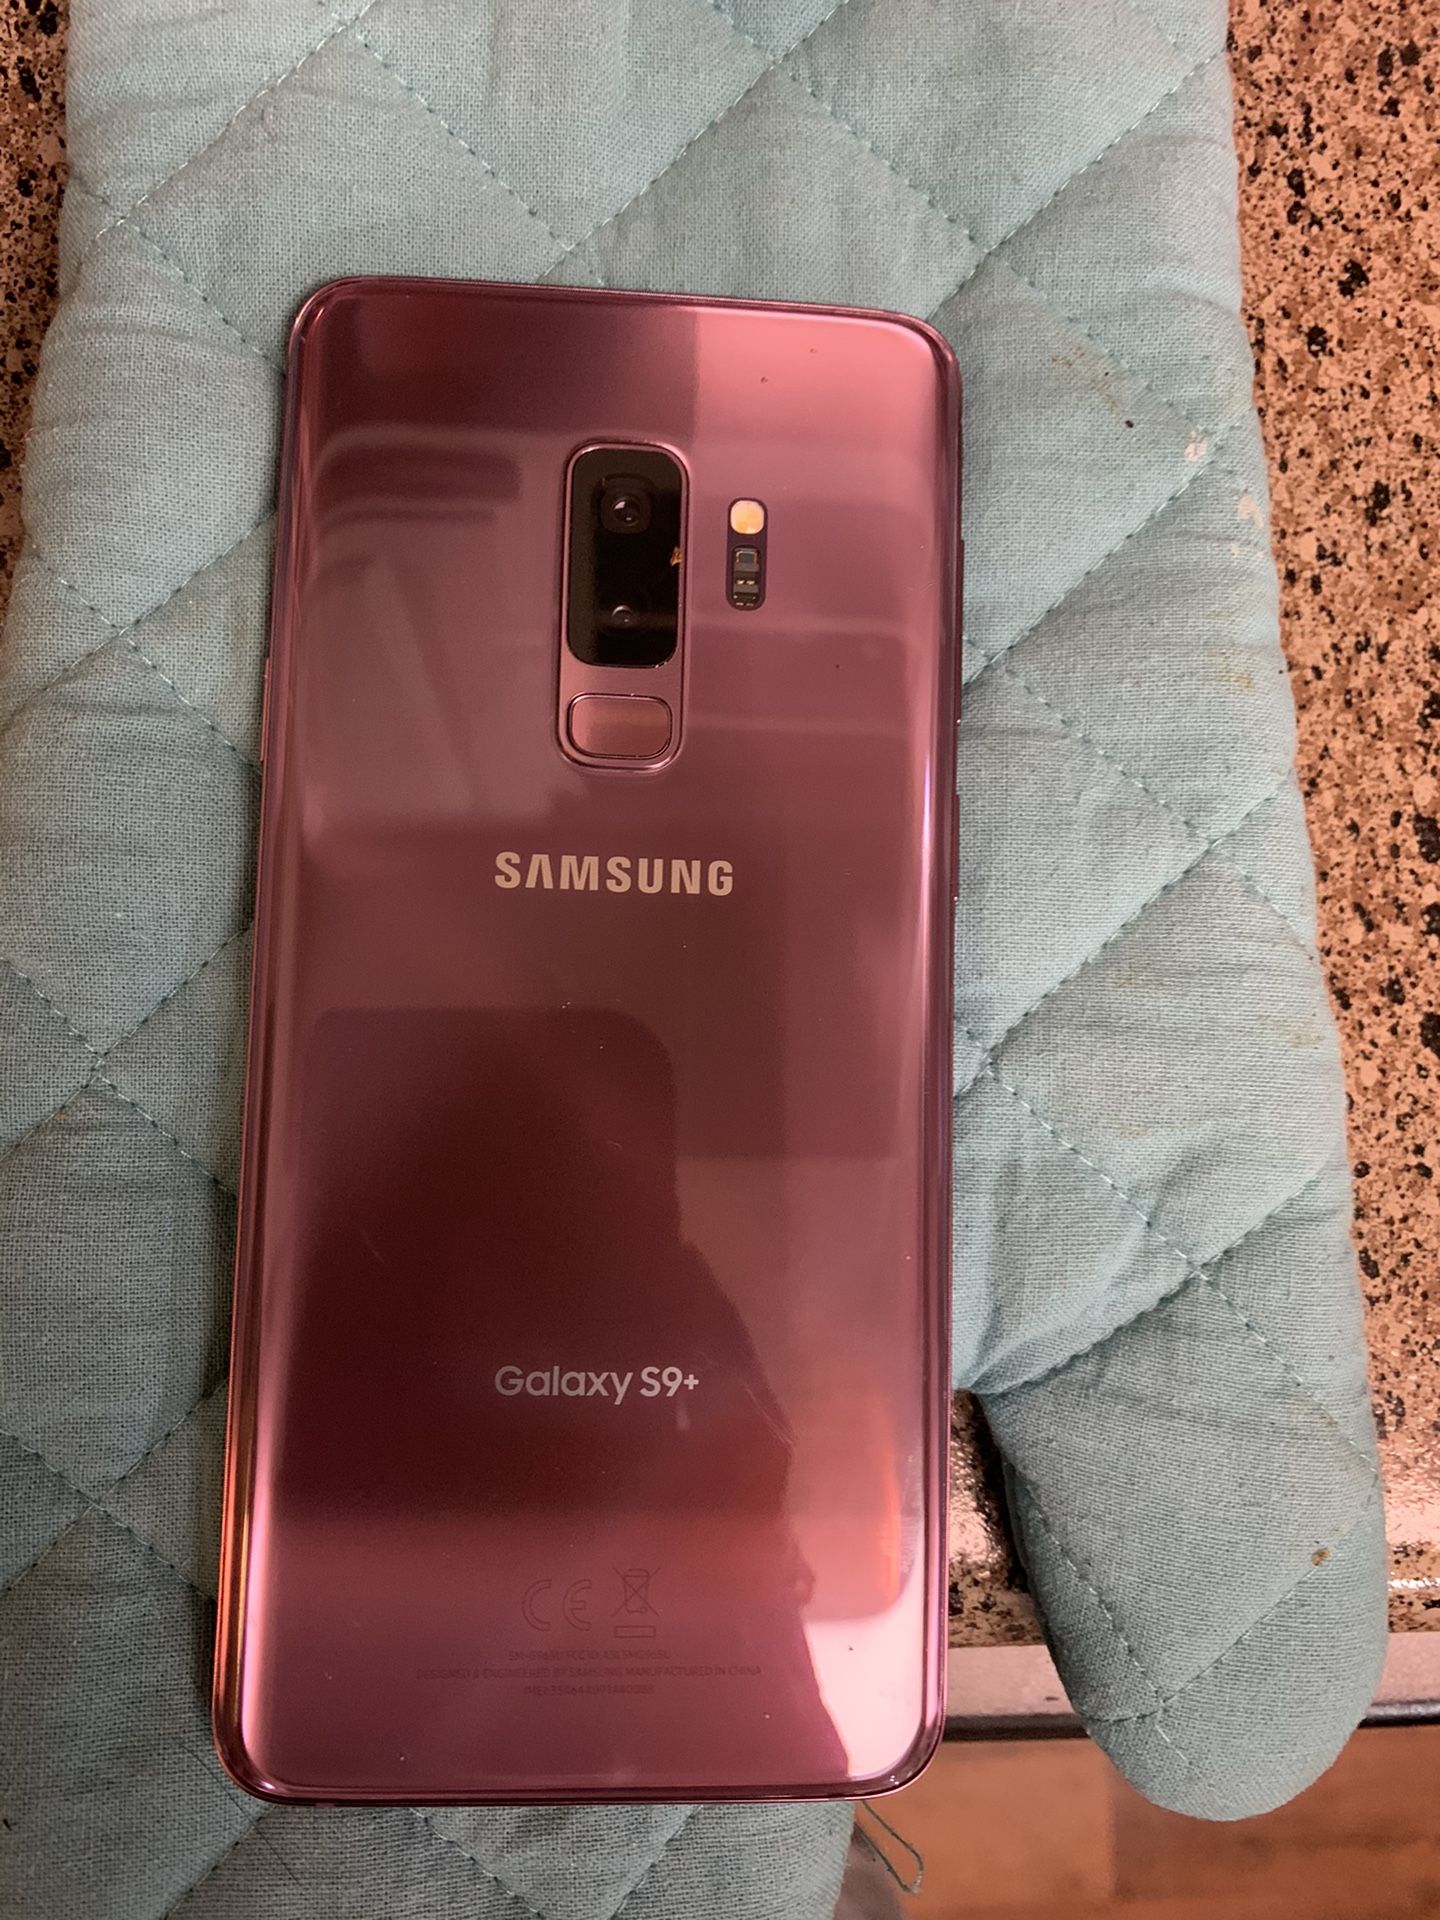 Galaxy Samsung S9+ Unlocked From T-Mobile